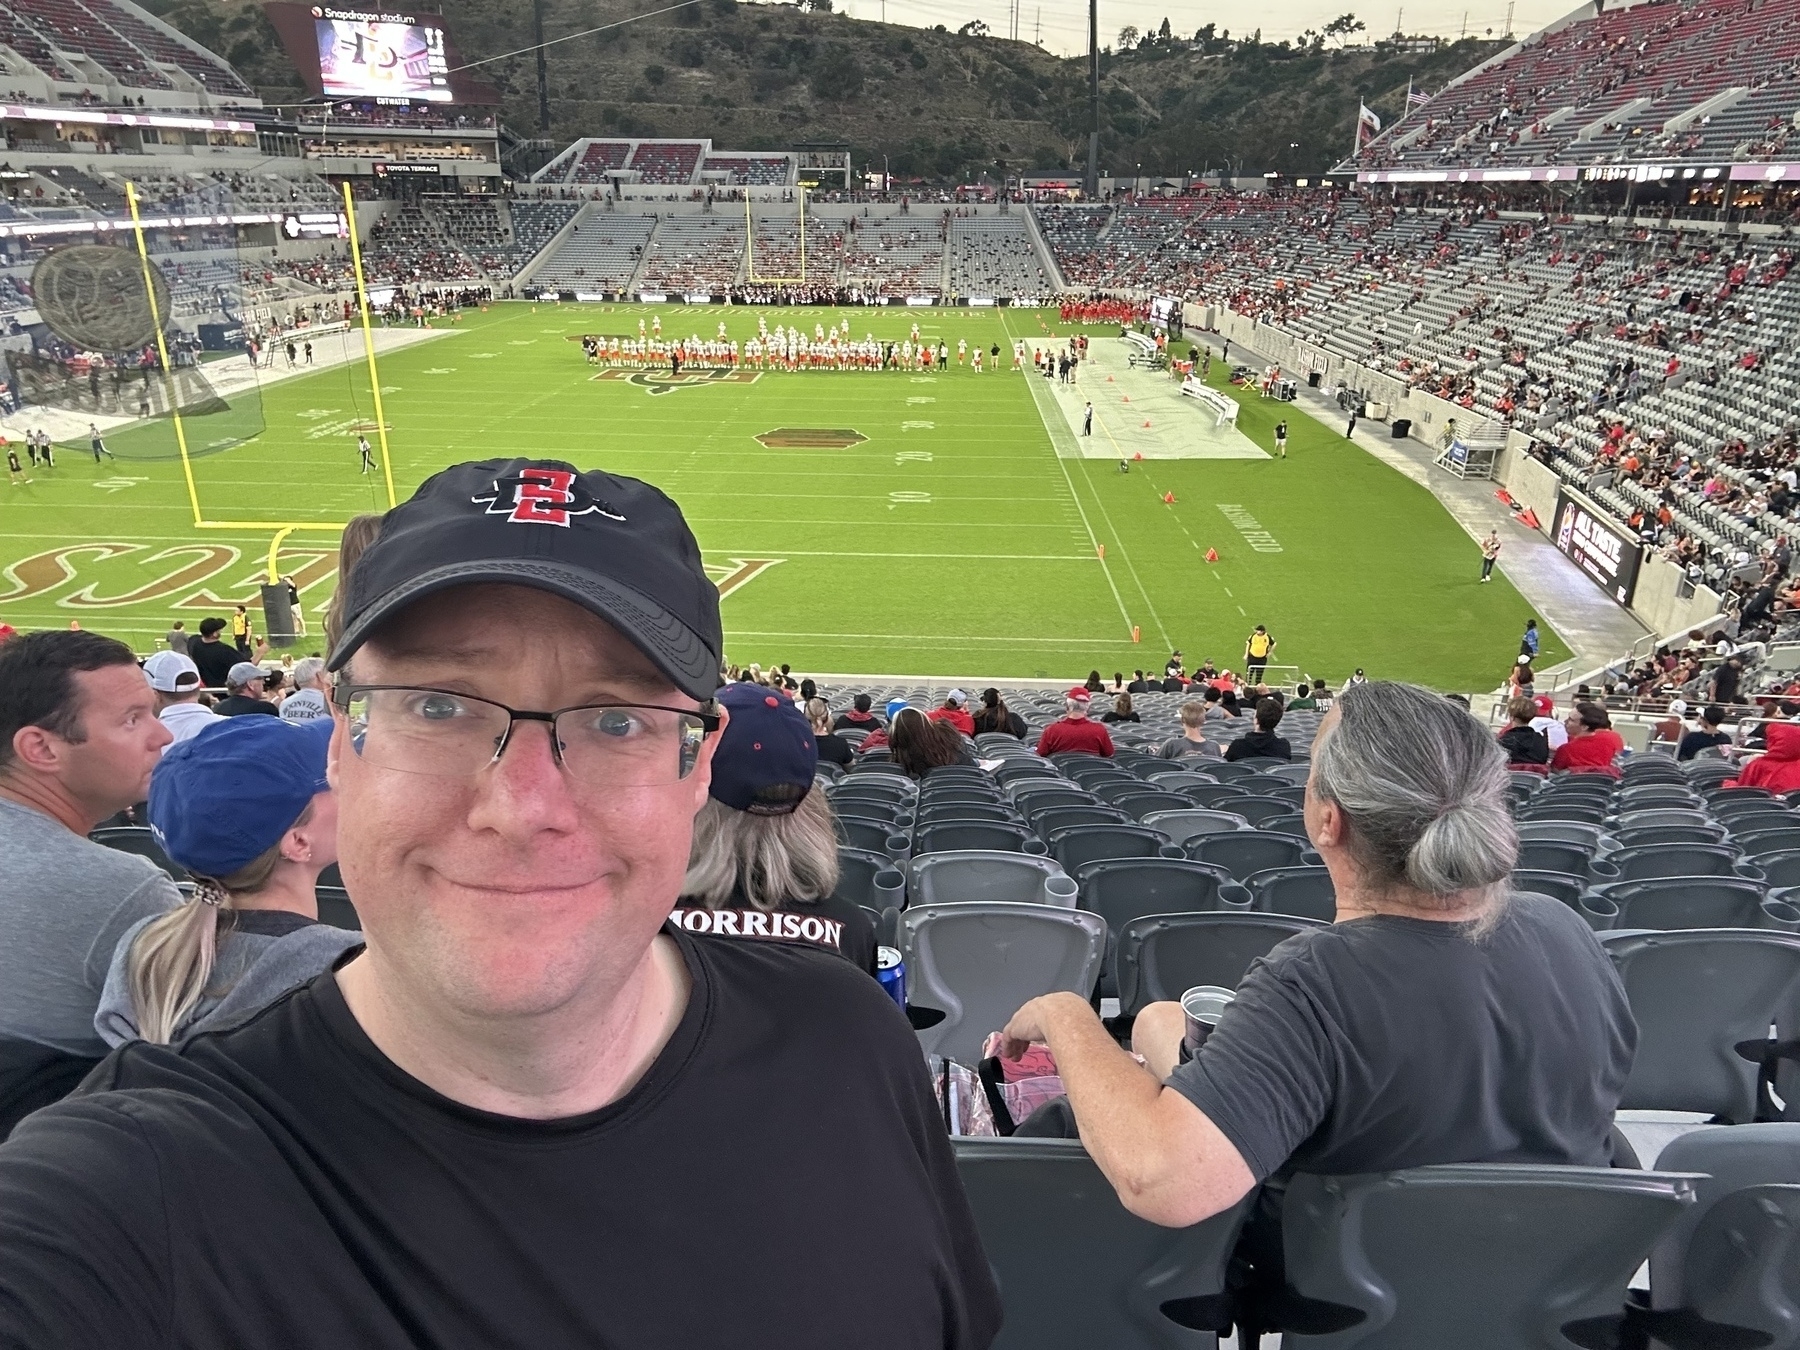 Self of the author in front a pregame football field at Snapdragon Stadium in San Diego, California, USA.